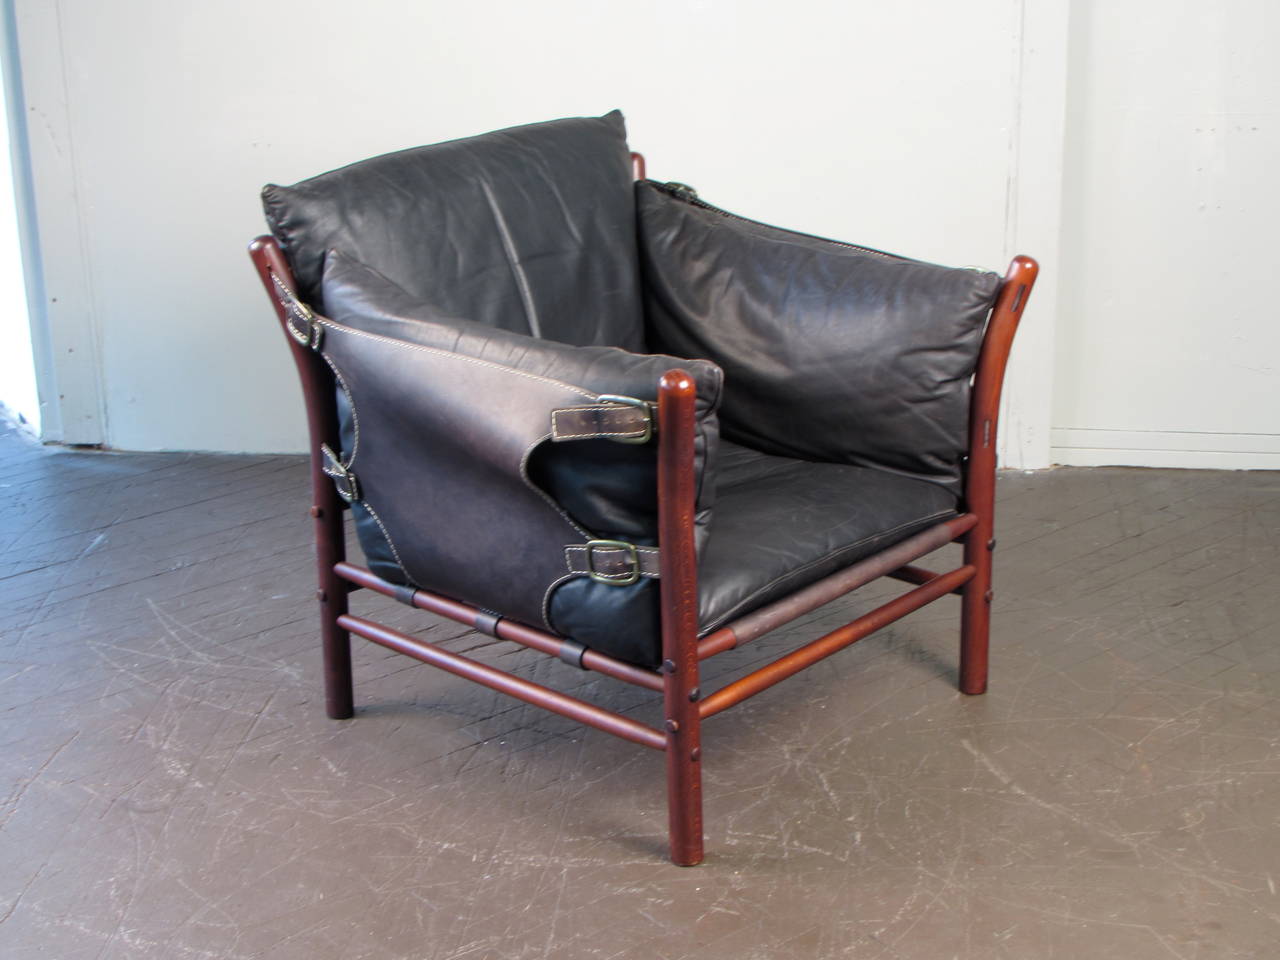 Beautifully conditioned Ilona lounge chair by Arne Norell, Sweden, circa 1960. Both leather and frame are in excellent condition. Chair is extremely comfortable! Arne Norell tag is intact.

We offer free delivery to NYC and Philadelphia area.